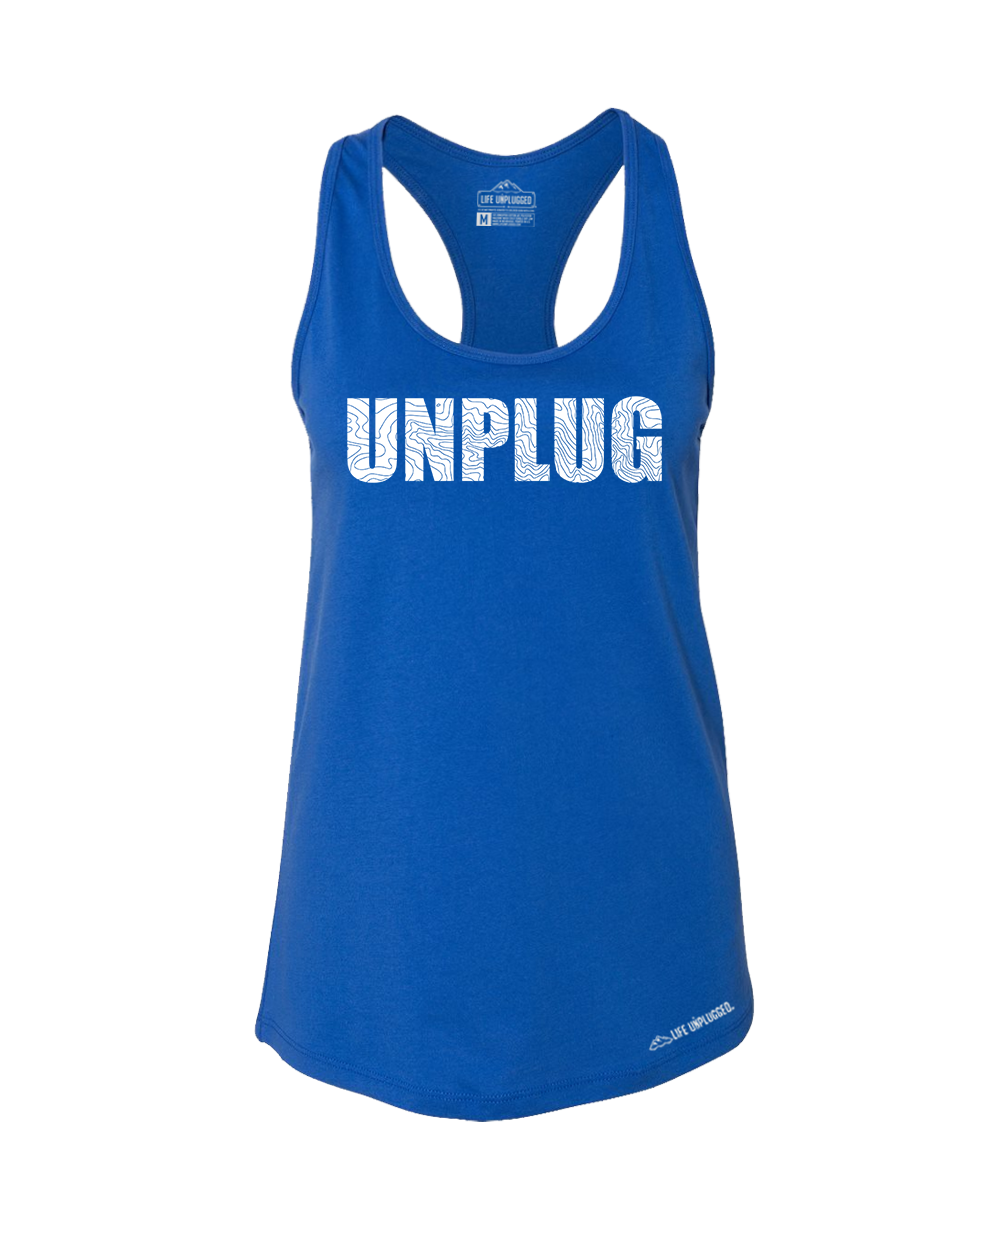 Unplug Topo Map Premium Women's Relaxed Fit Racerback Tank Top - Life Unplugged